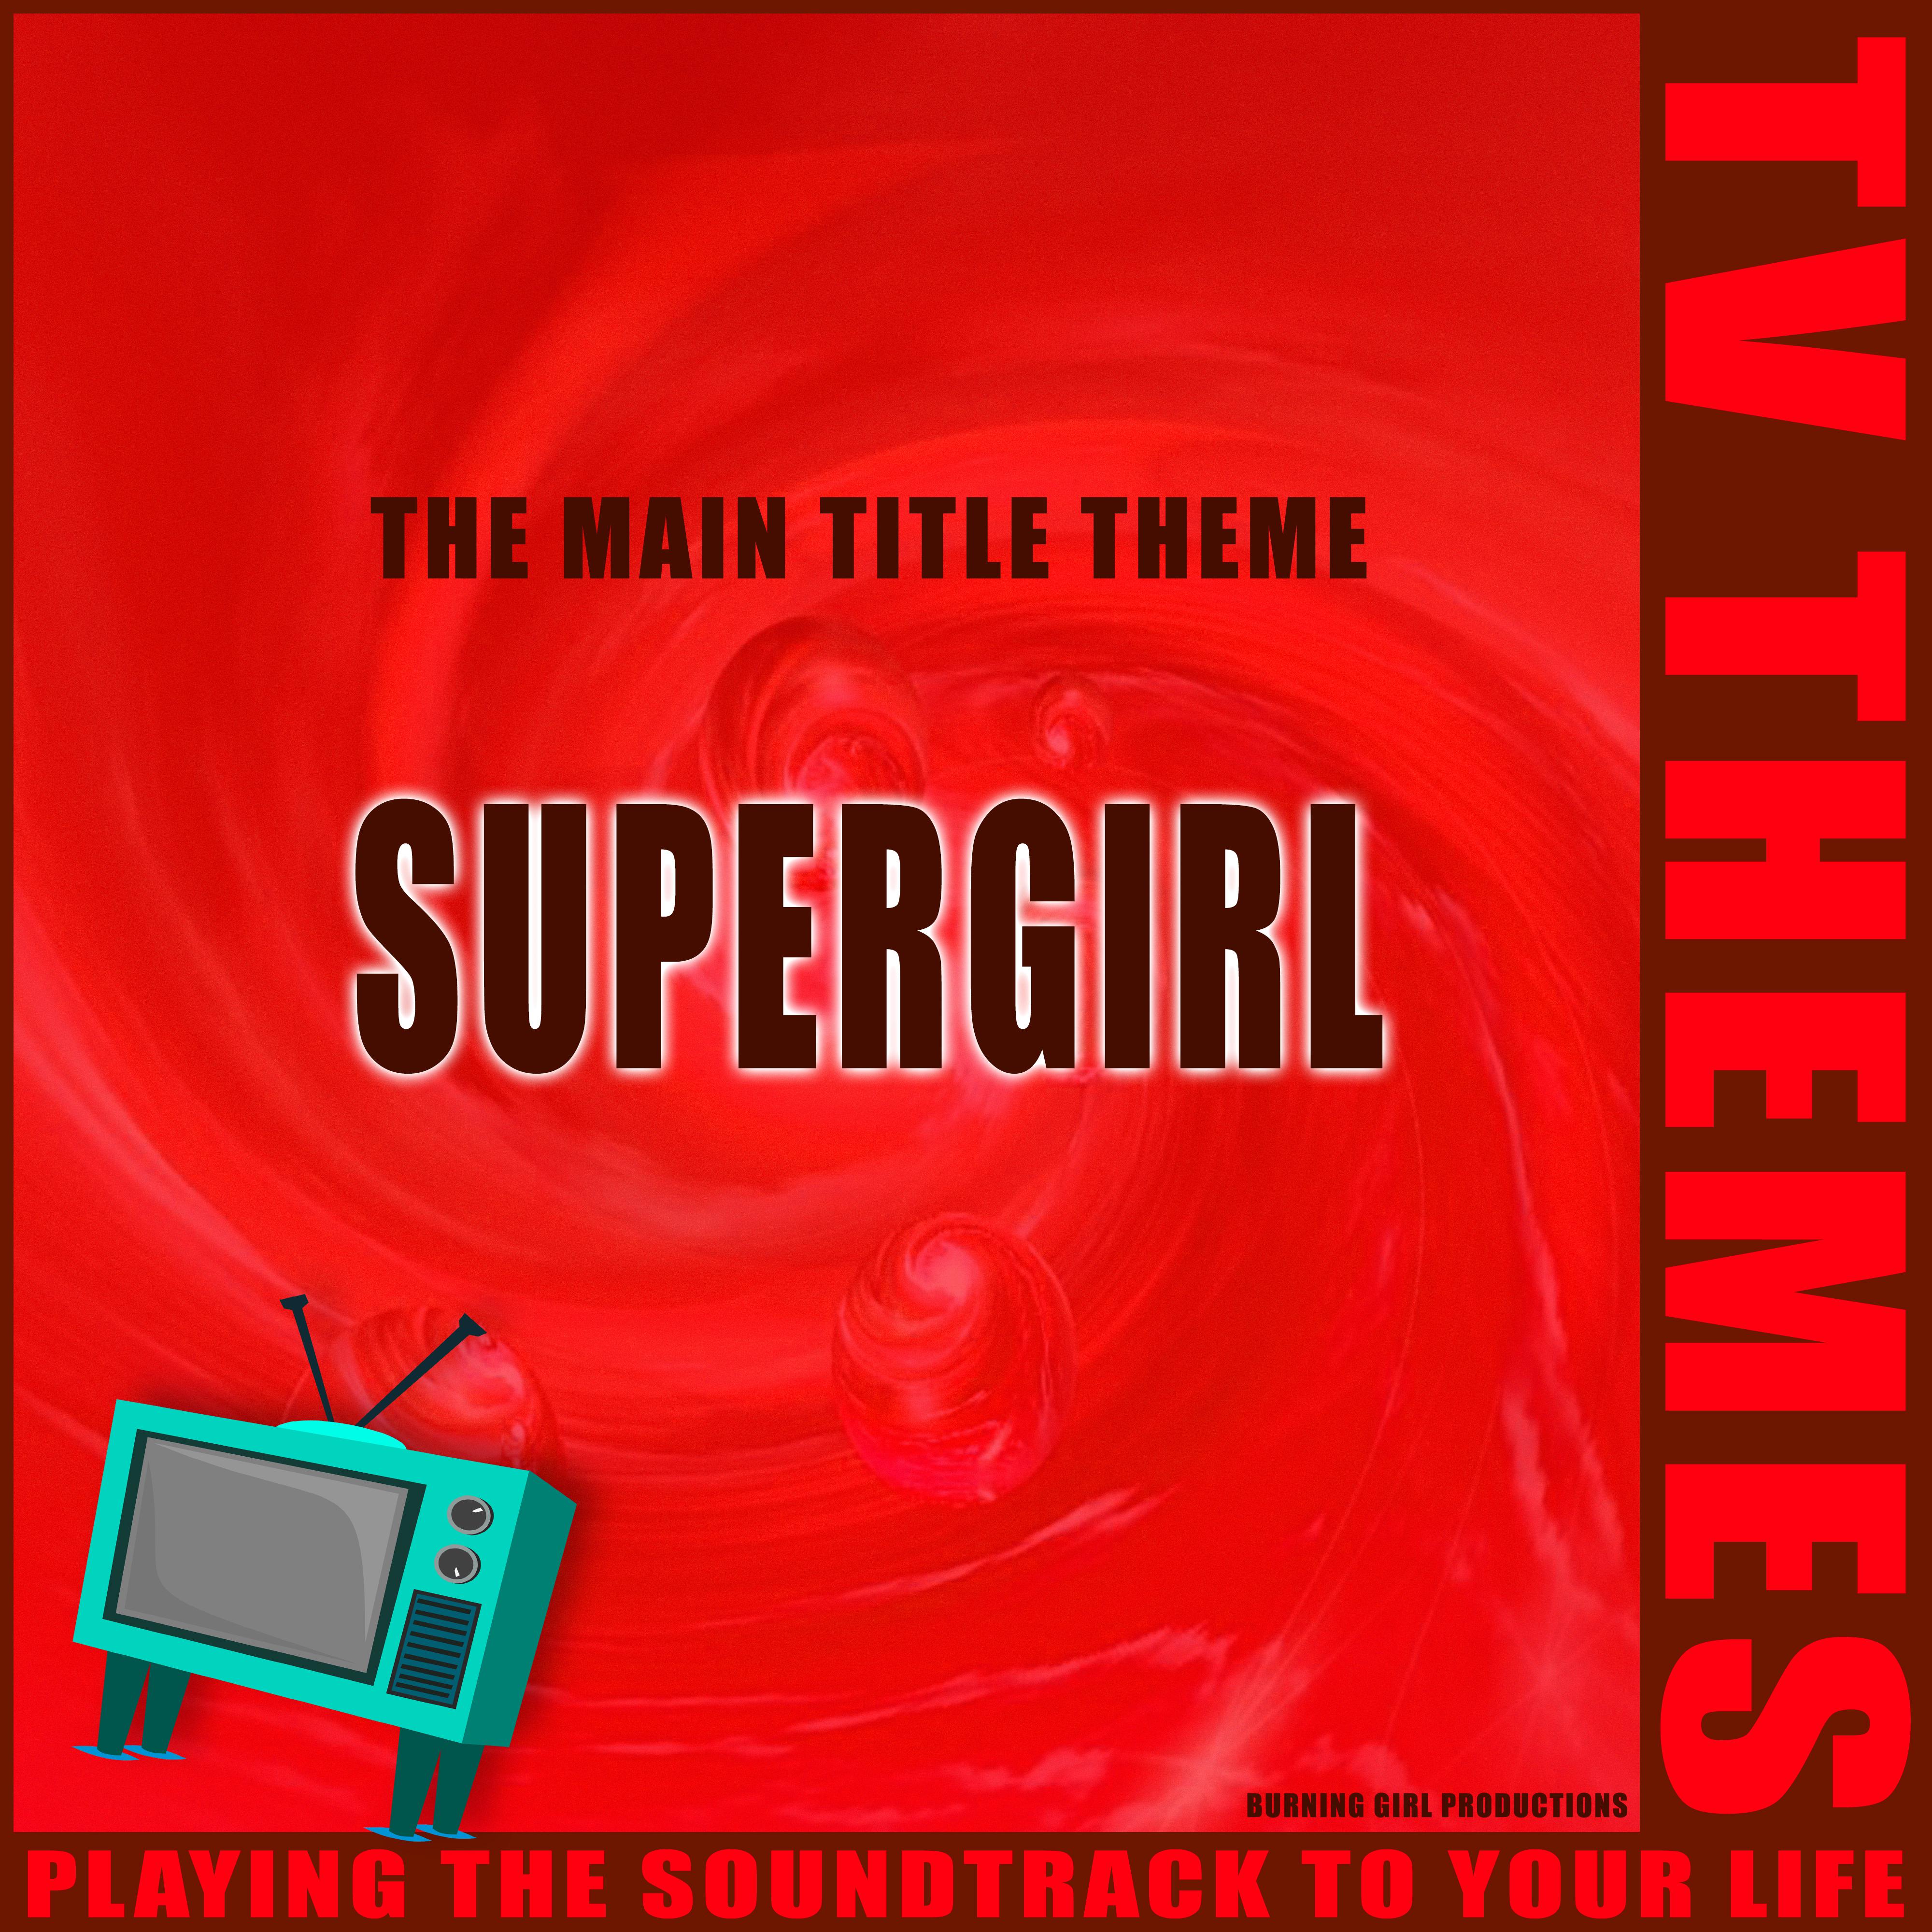 The Main Title Theme - Supergirl